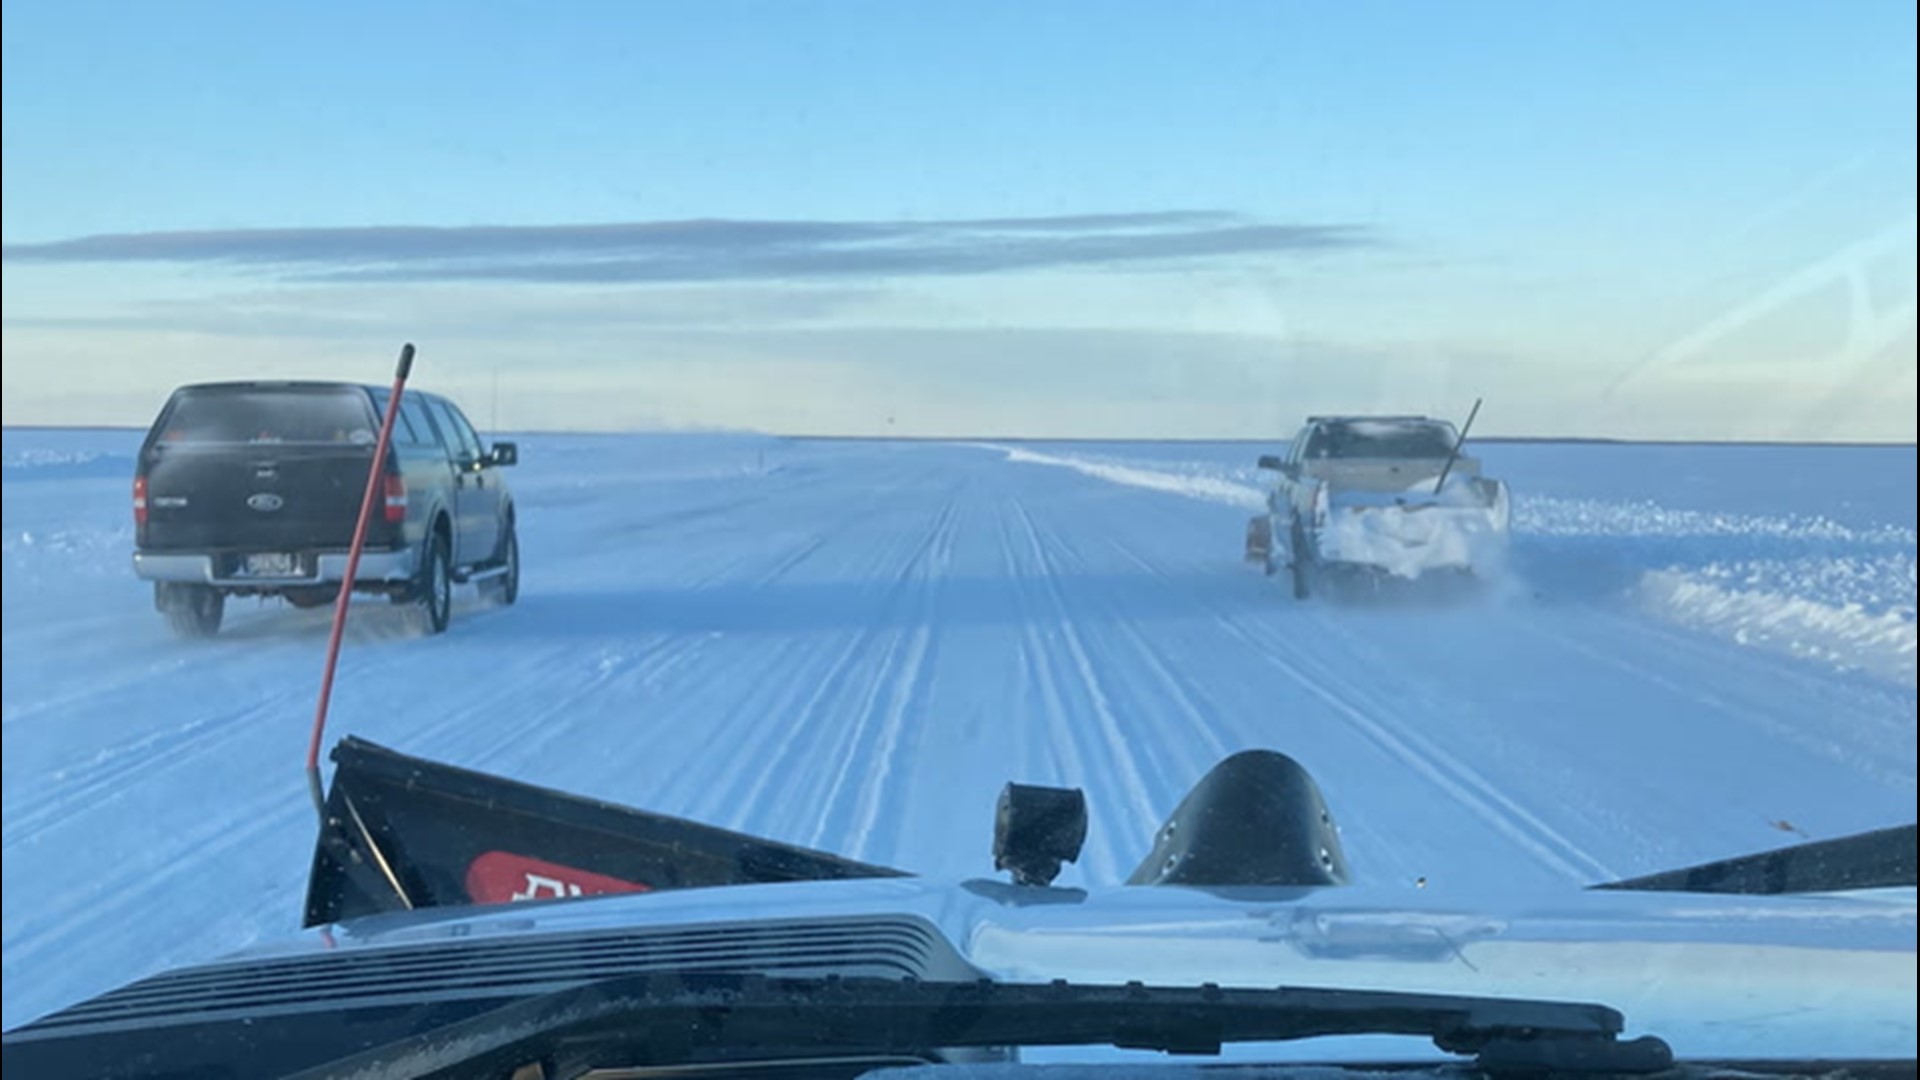 Businesses in Minnesota's Northwest Angle have struggled since the border closed. This winter, they took matters into their own hands and built a 22-mile-long ice road.